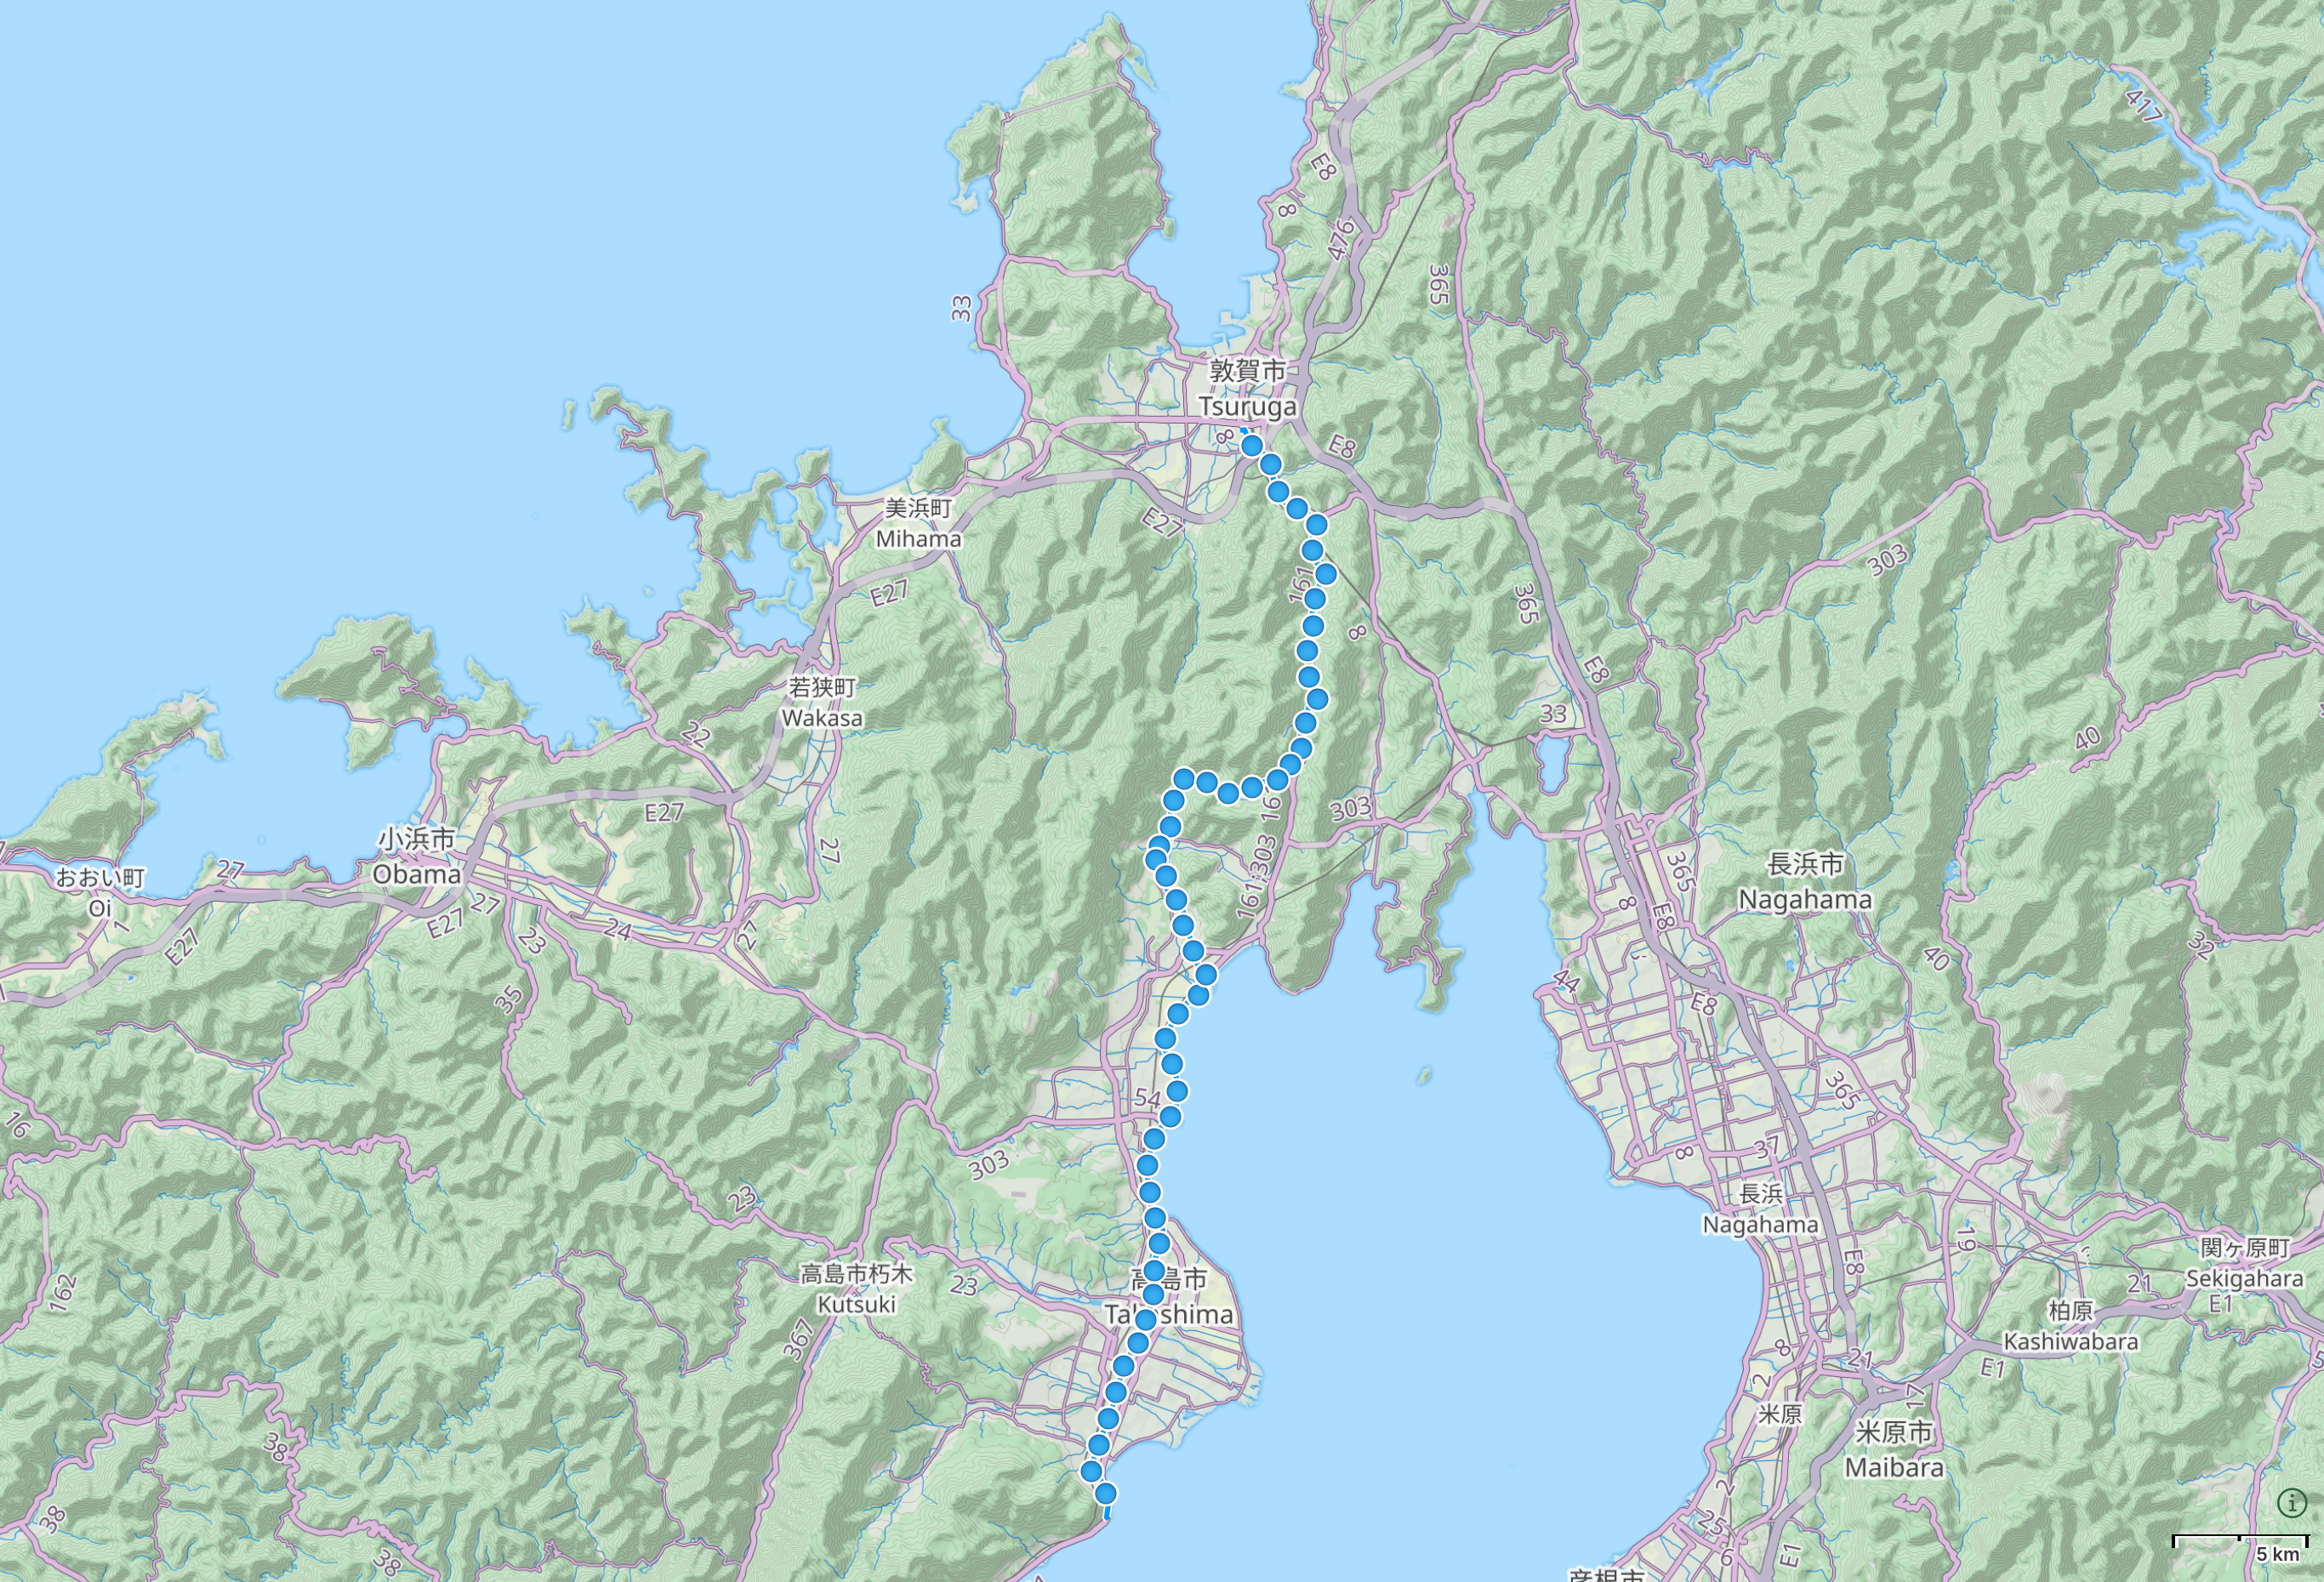 Map of the Lake Biwa/Sea of Japan area with route between Shirahige Shrine and Tsuruga highlighted.